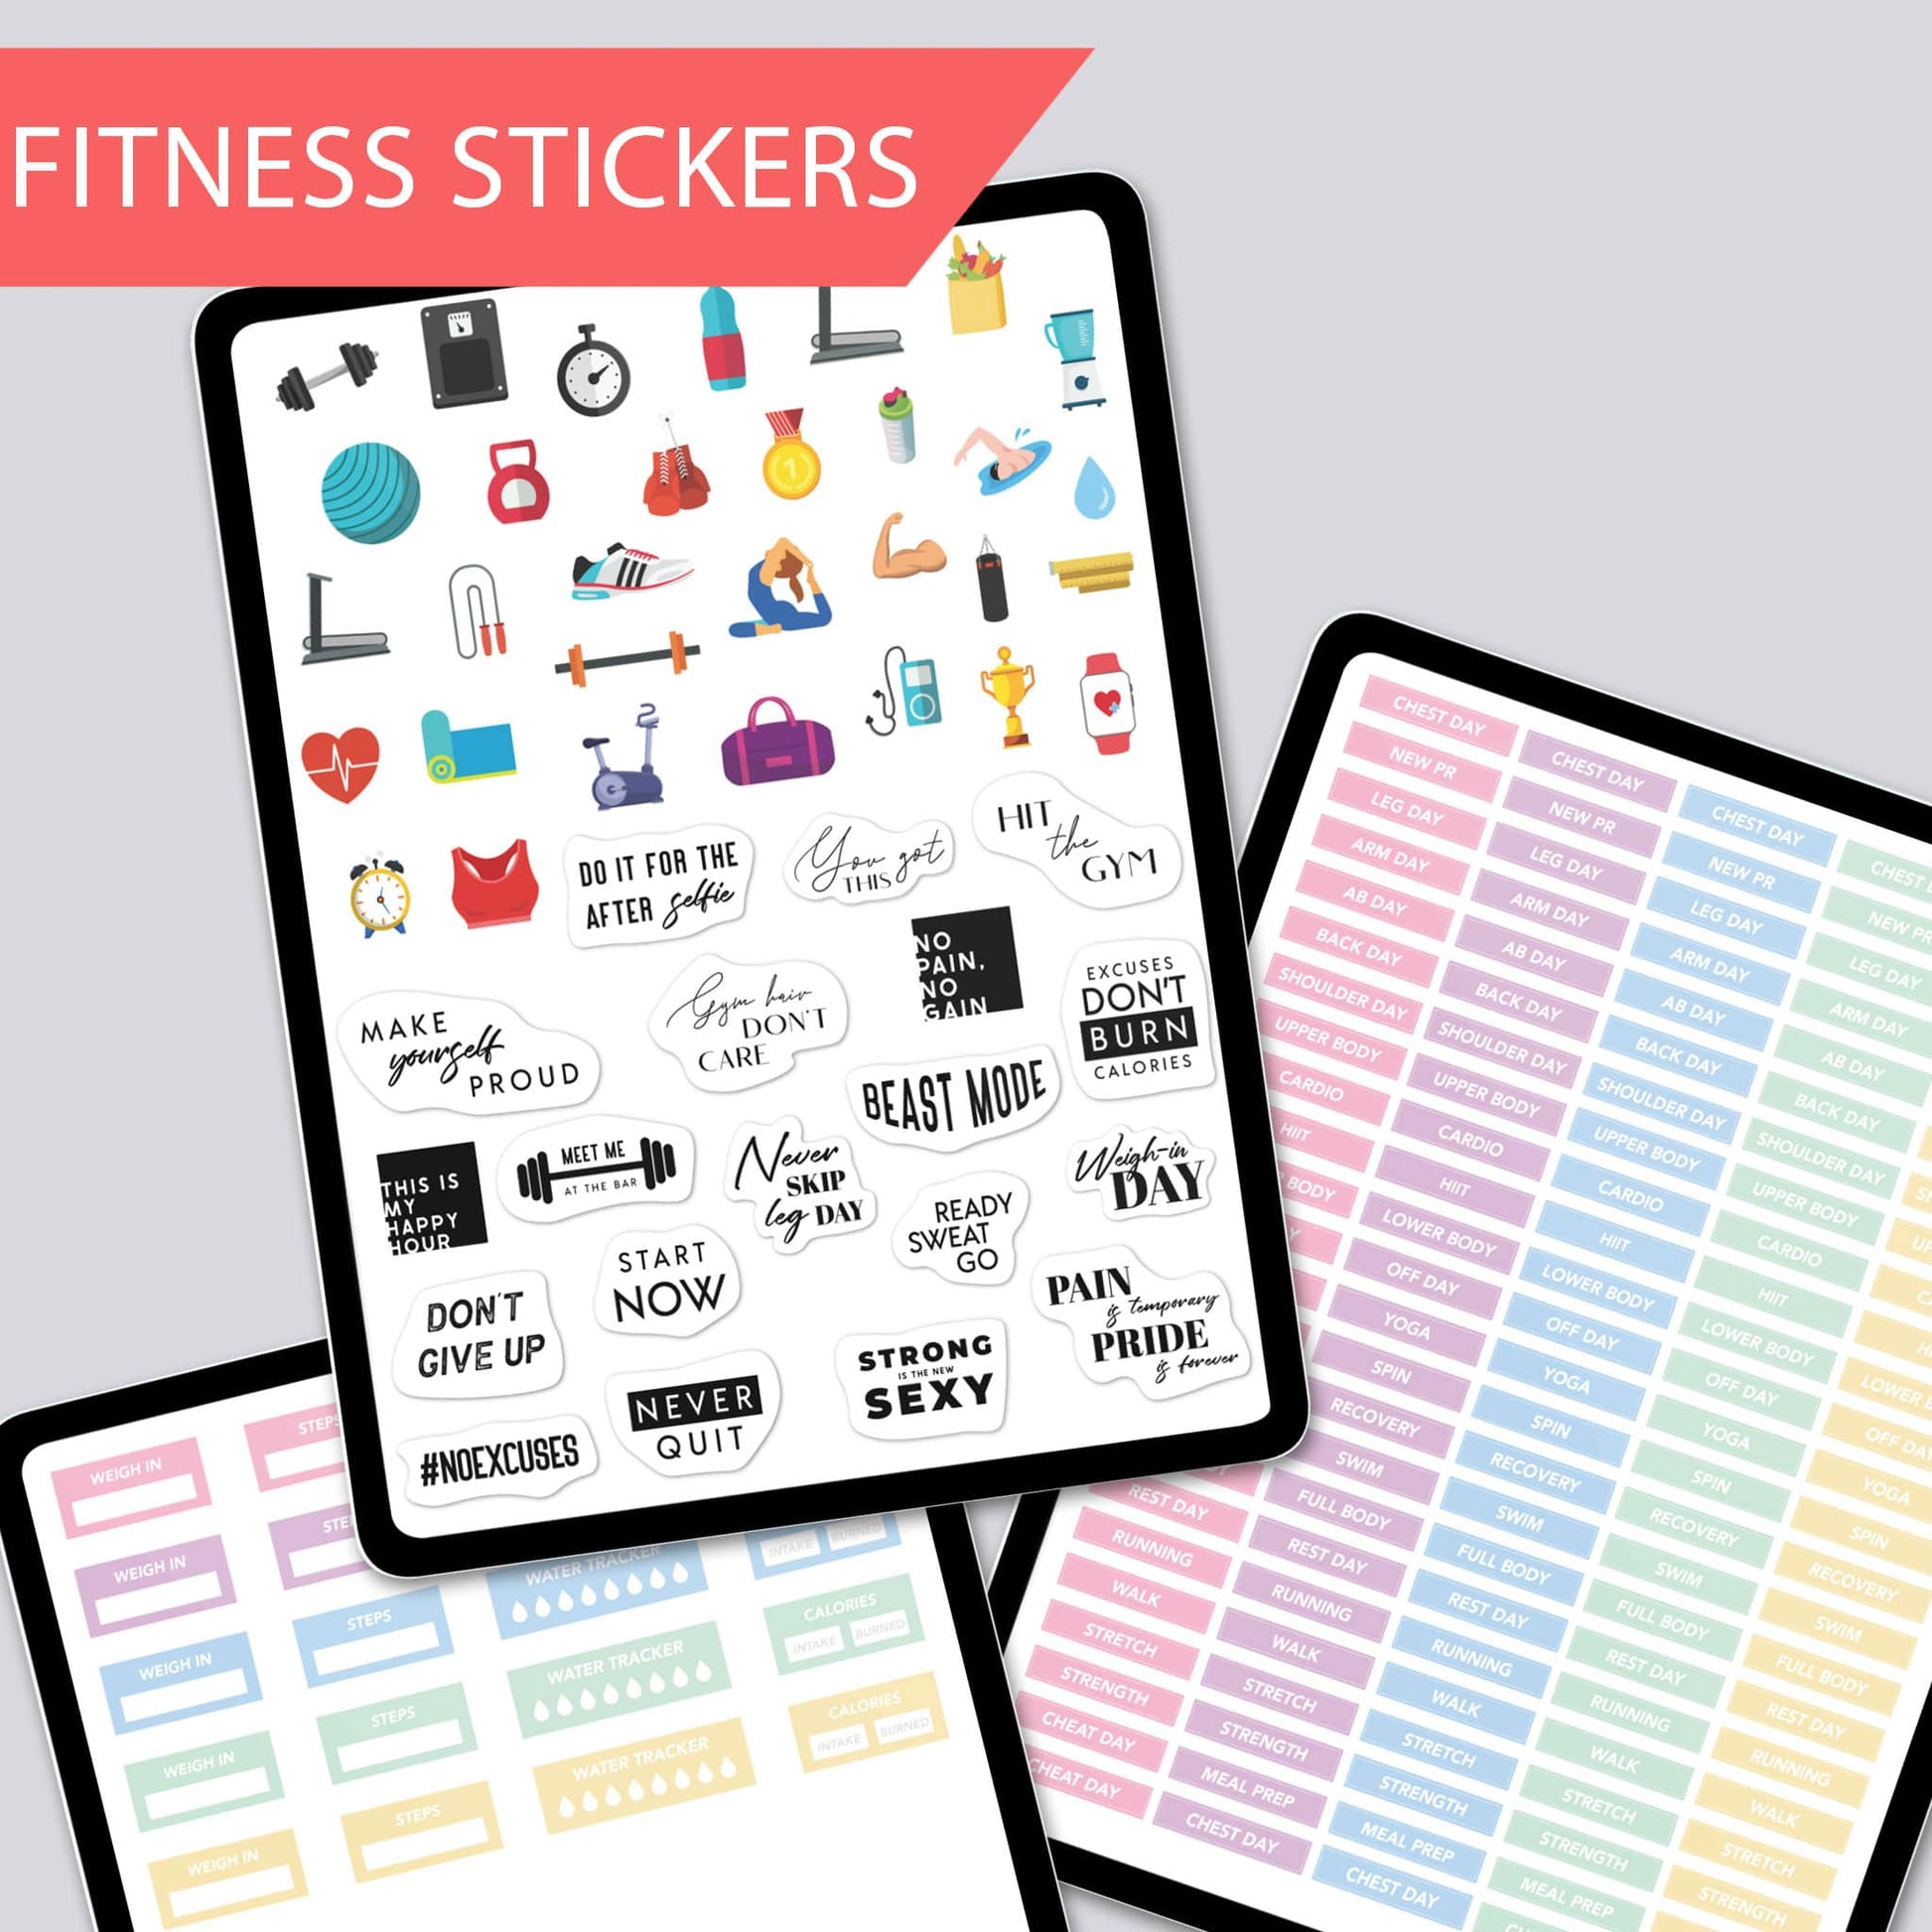 Digital Productivity Stickers for Digital Planning in GoodNotes